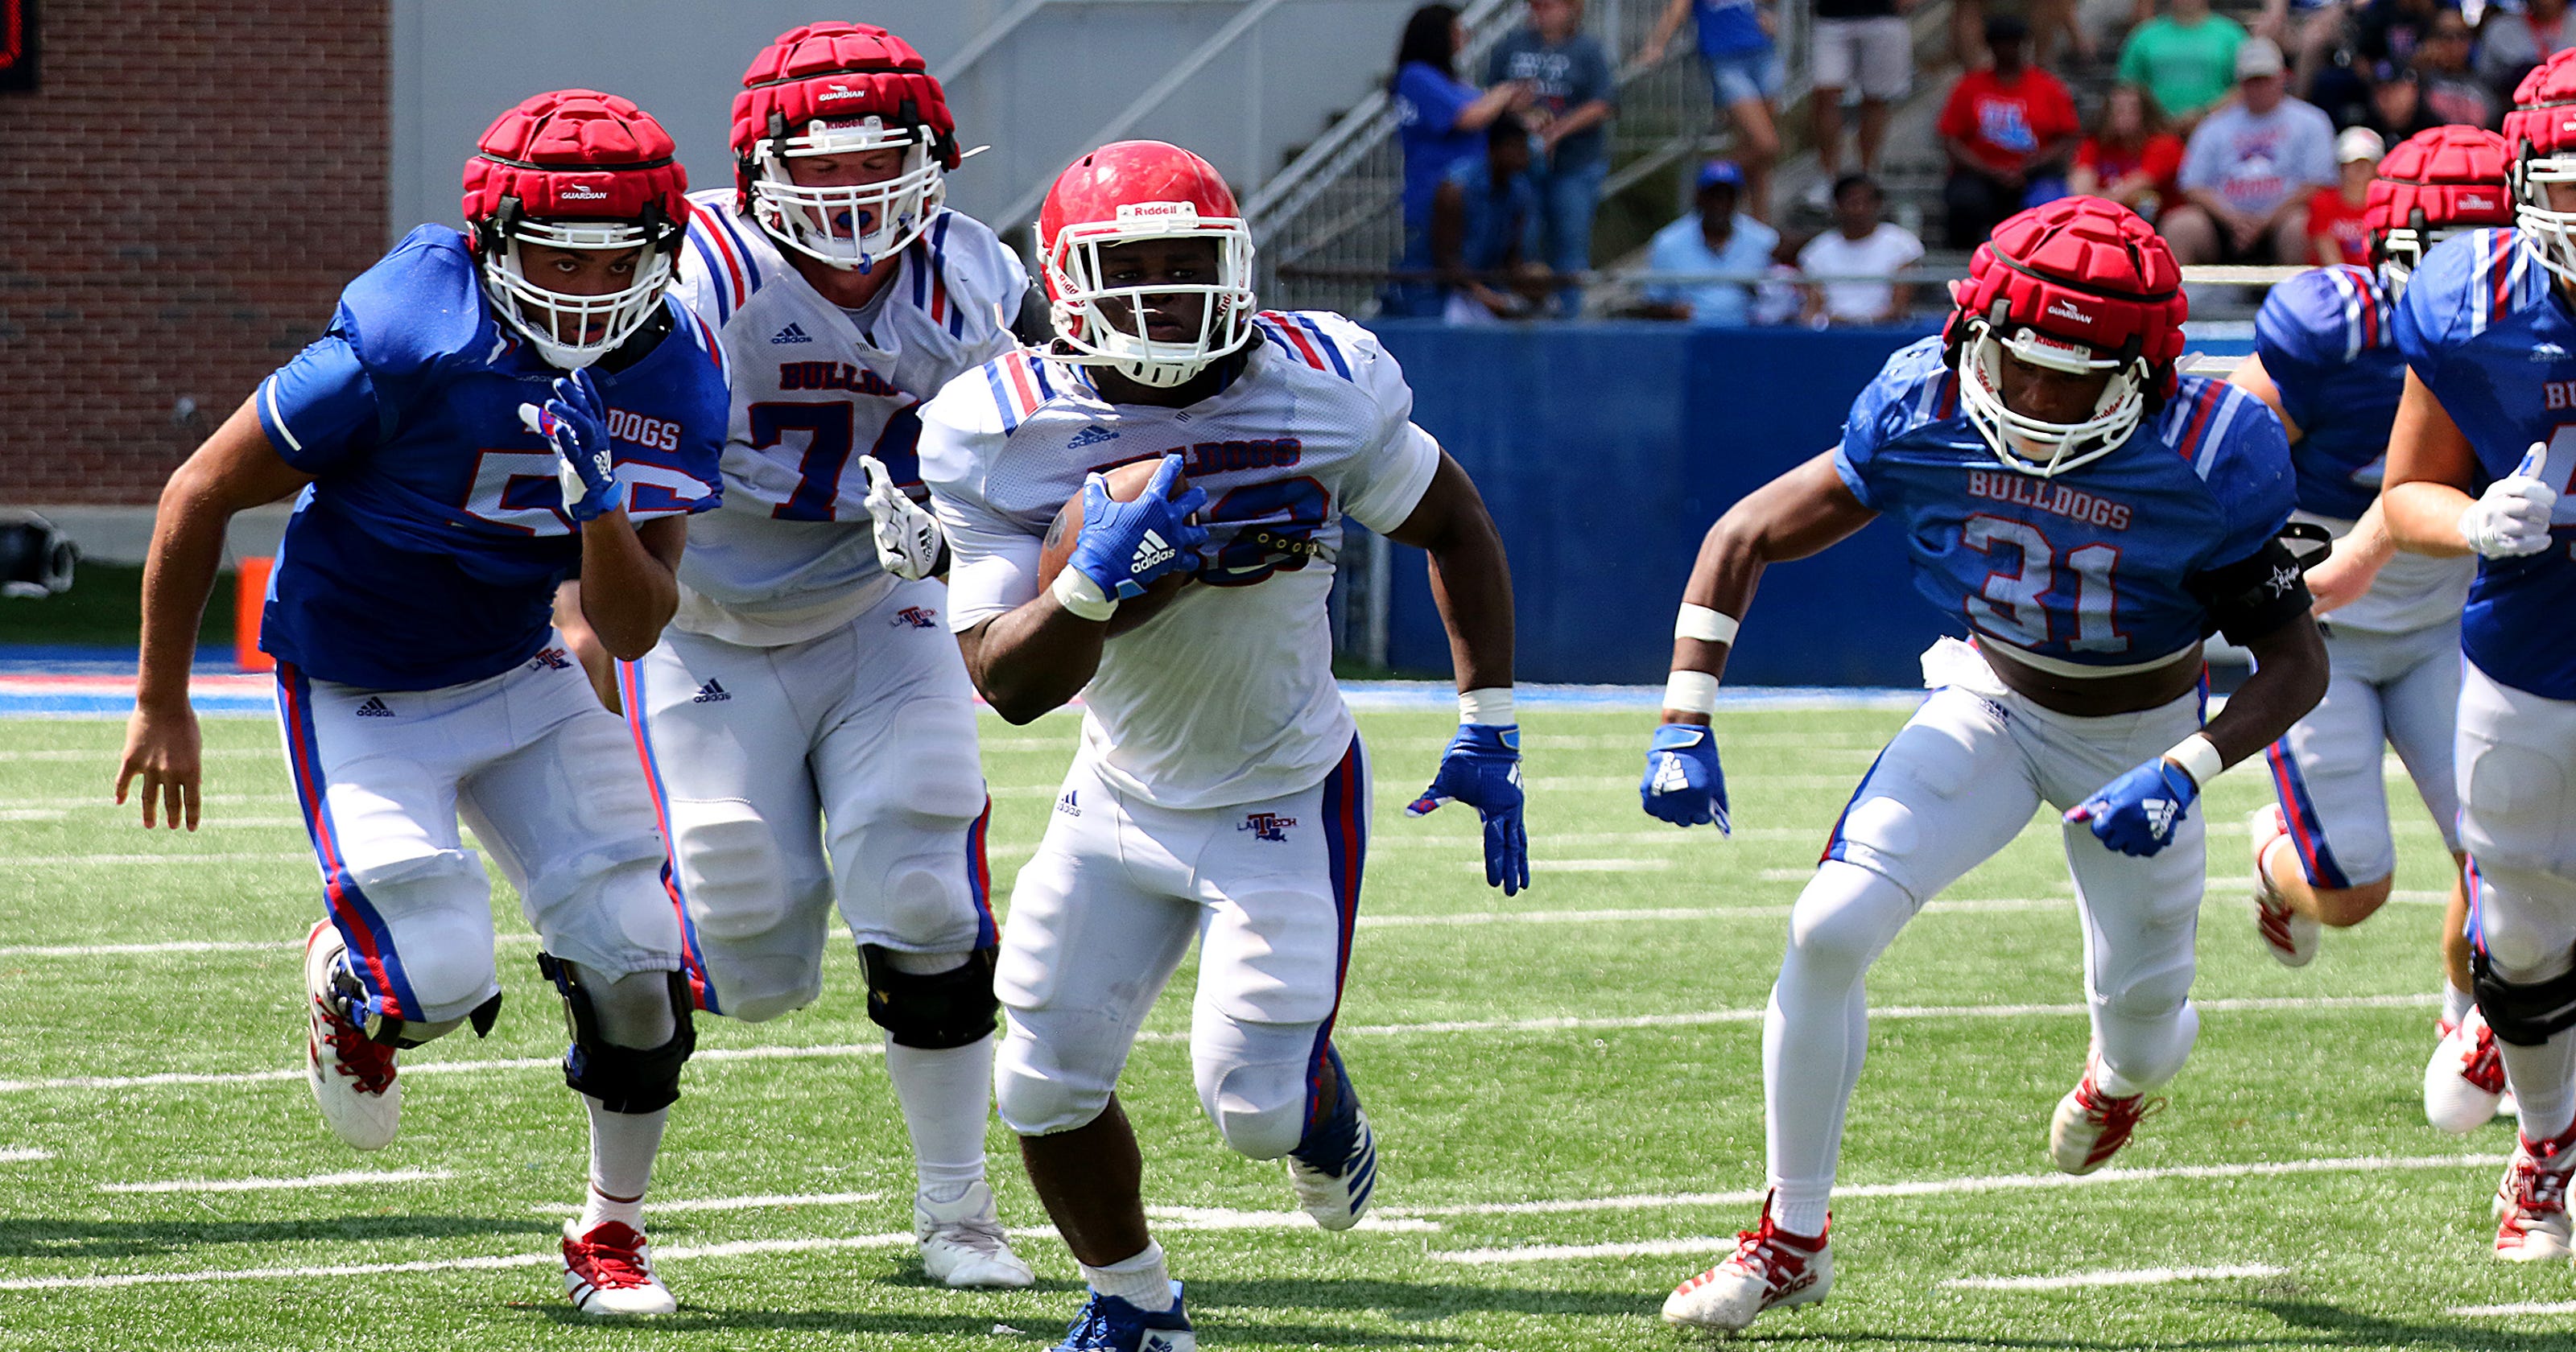 LA Tech football forming depth chart after second scrimmage